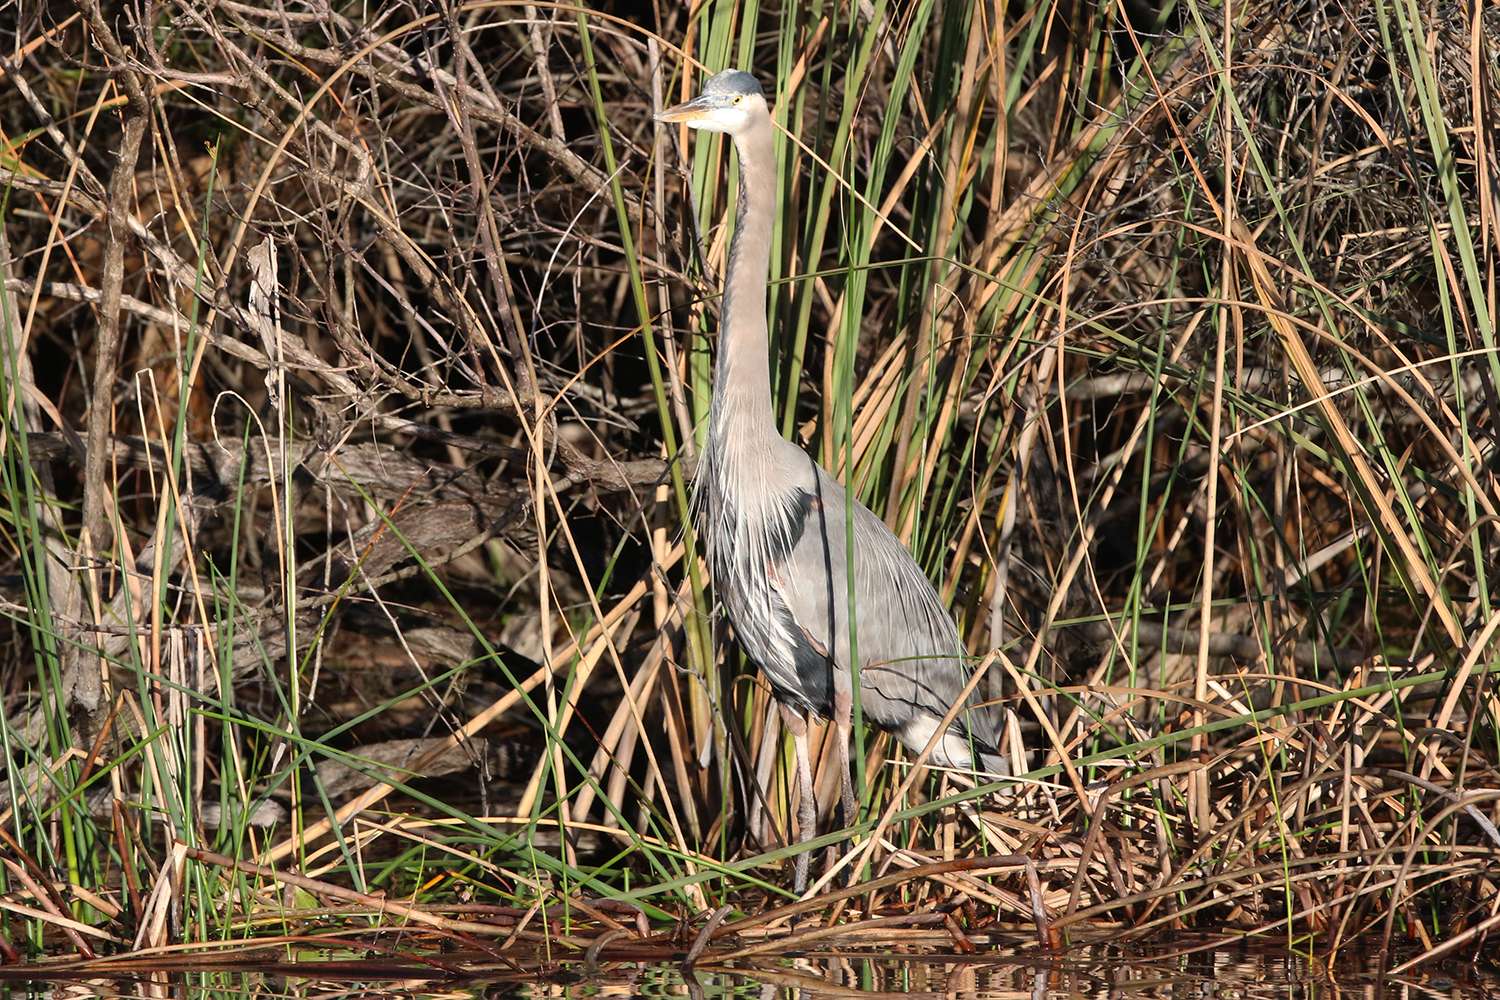 Great blue heron, St. Johns River, 2019.